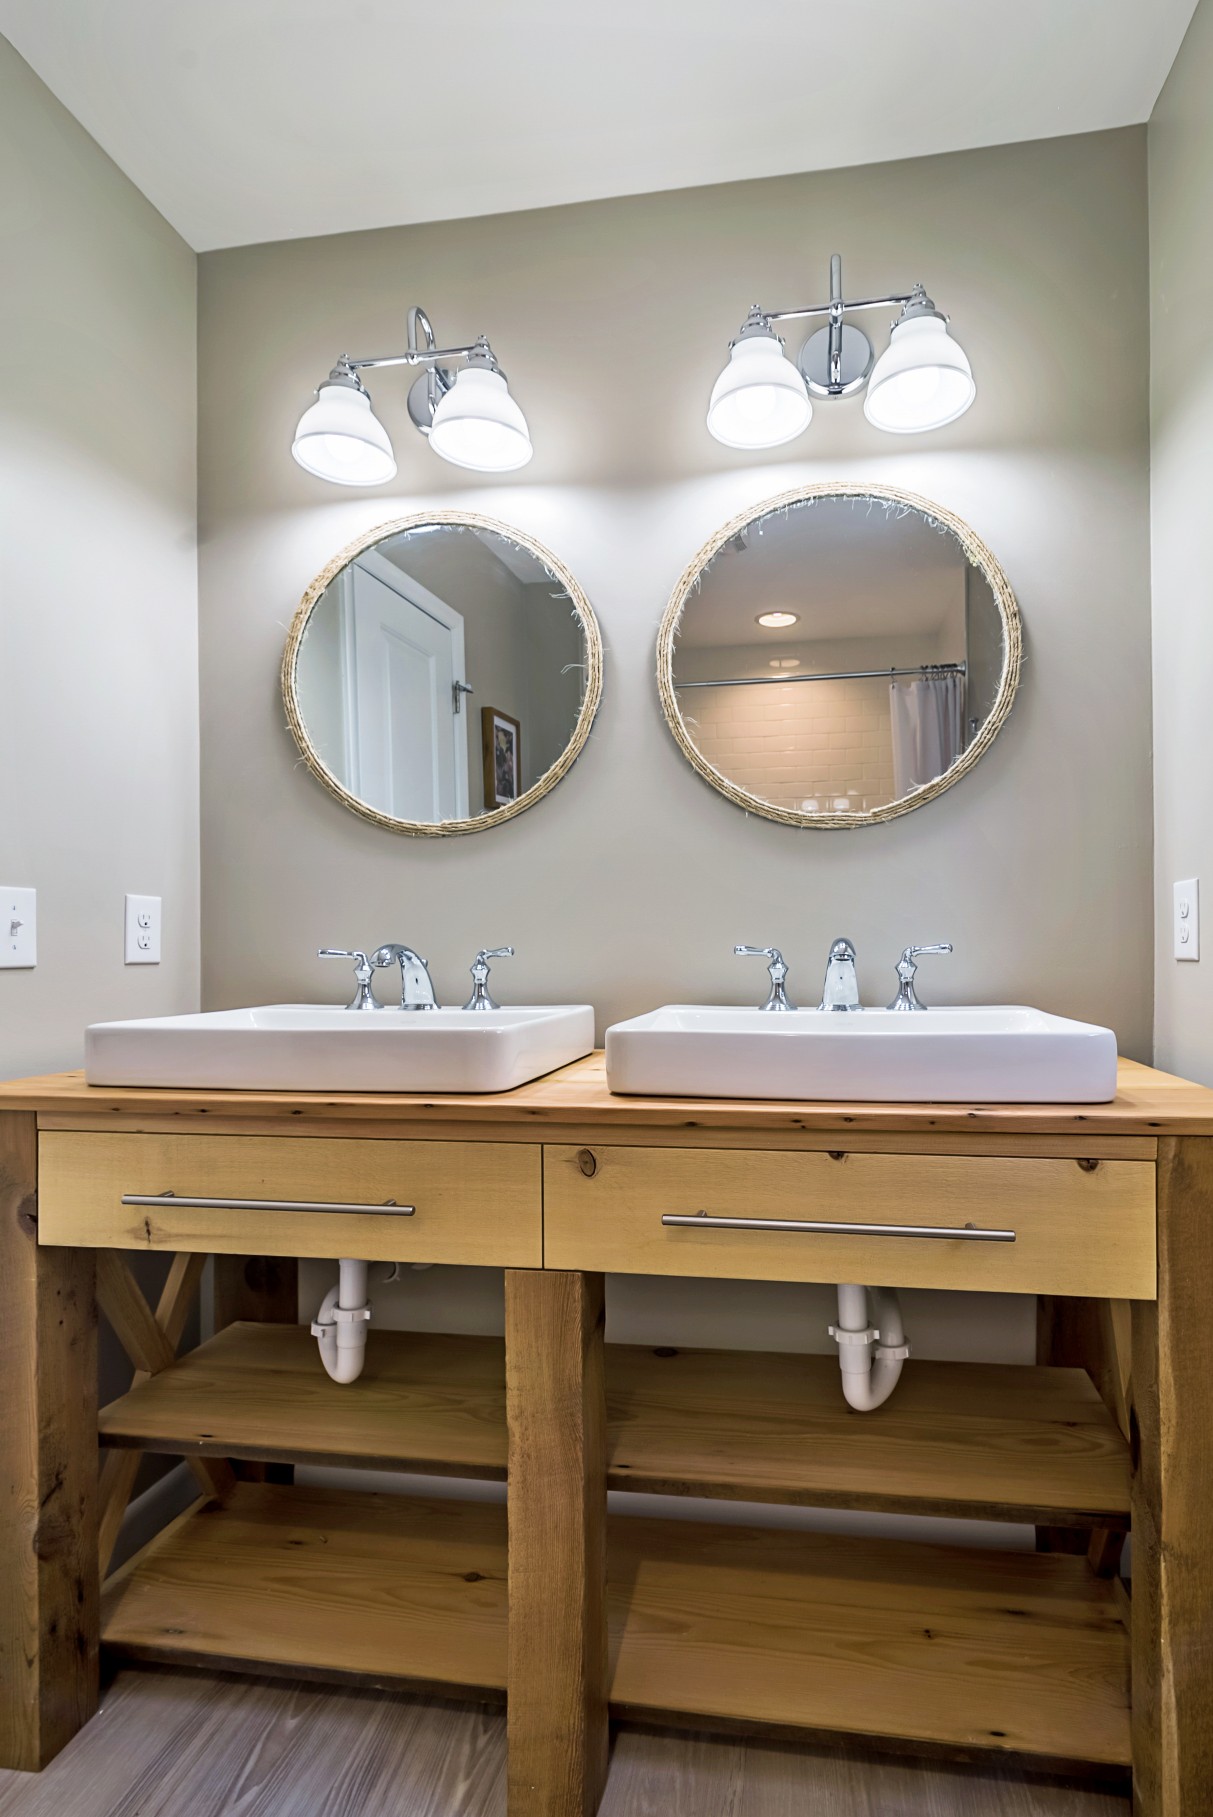 Bathroom Remodel in Wellington Parkway, Bethany Beach DE with Two Sinks, Chrome Faucets and Dual Double Lighting